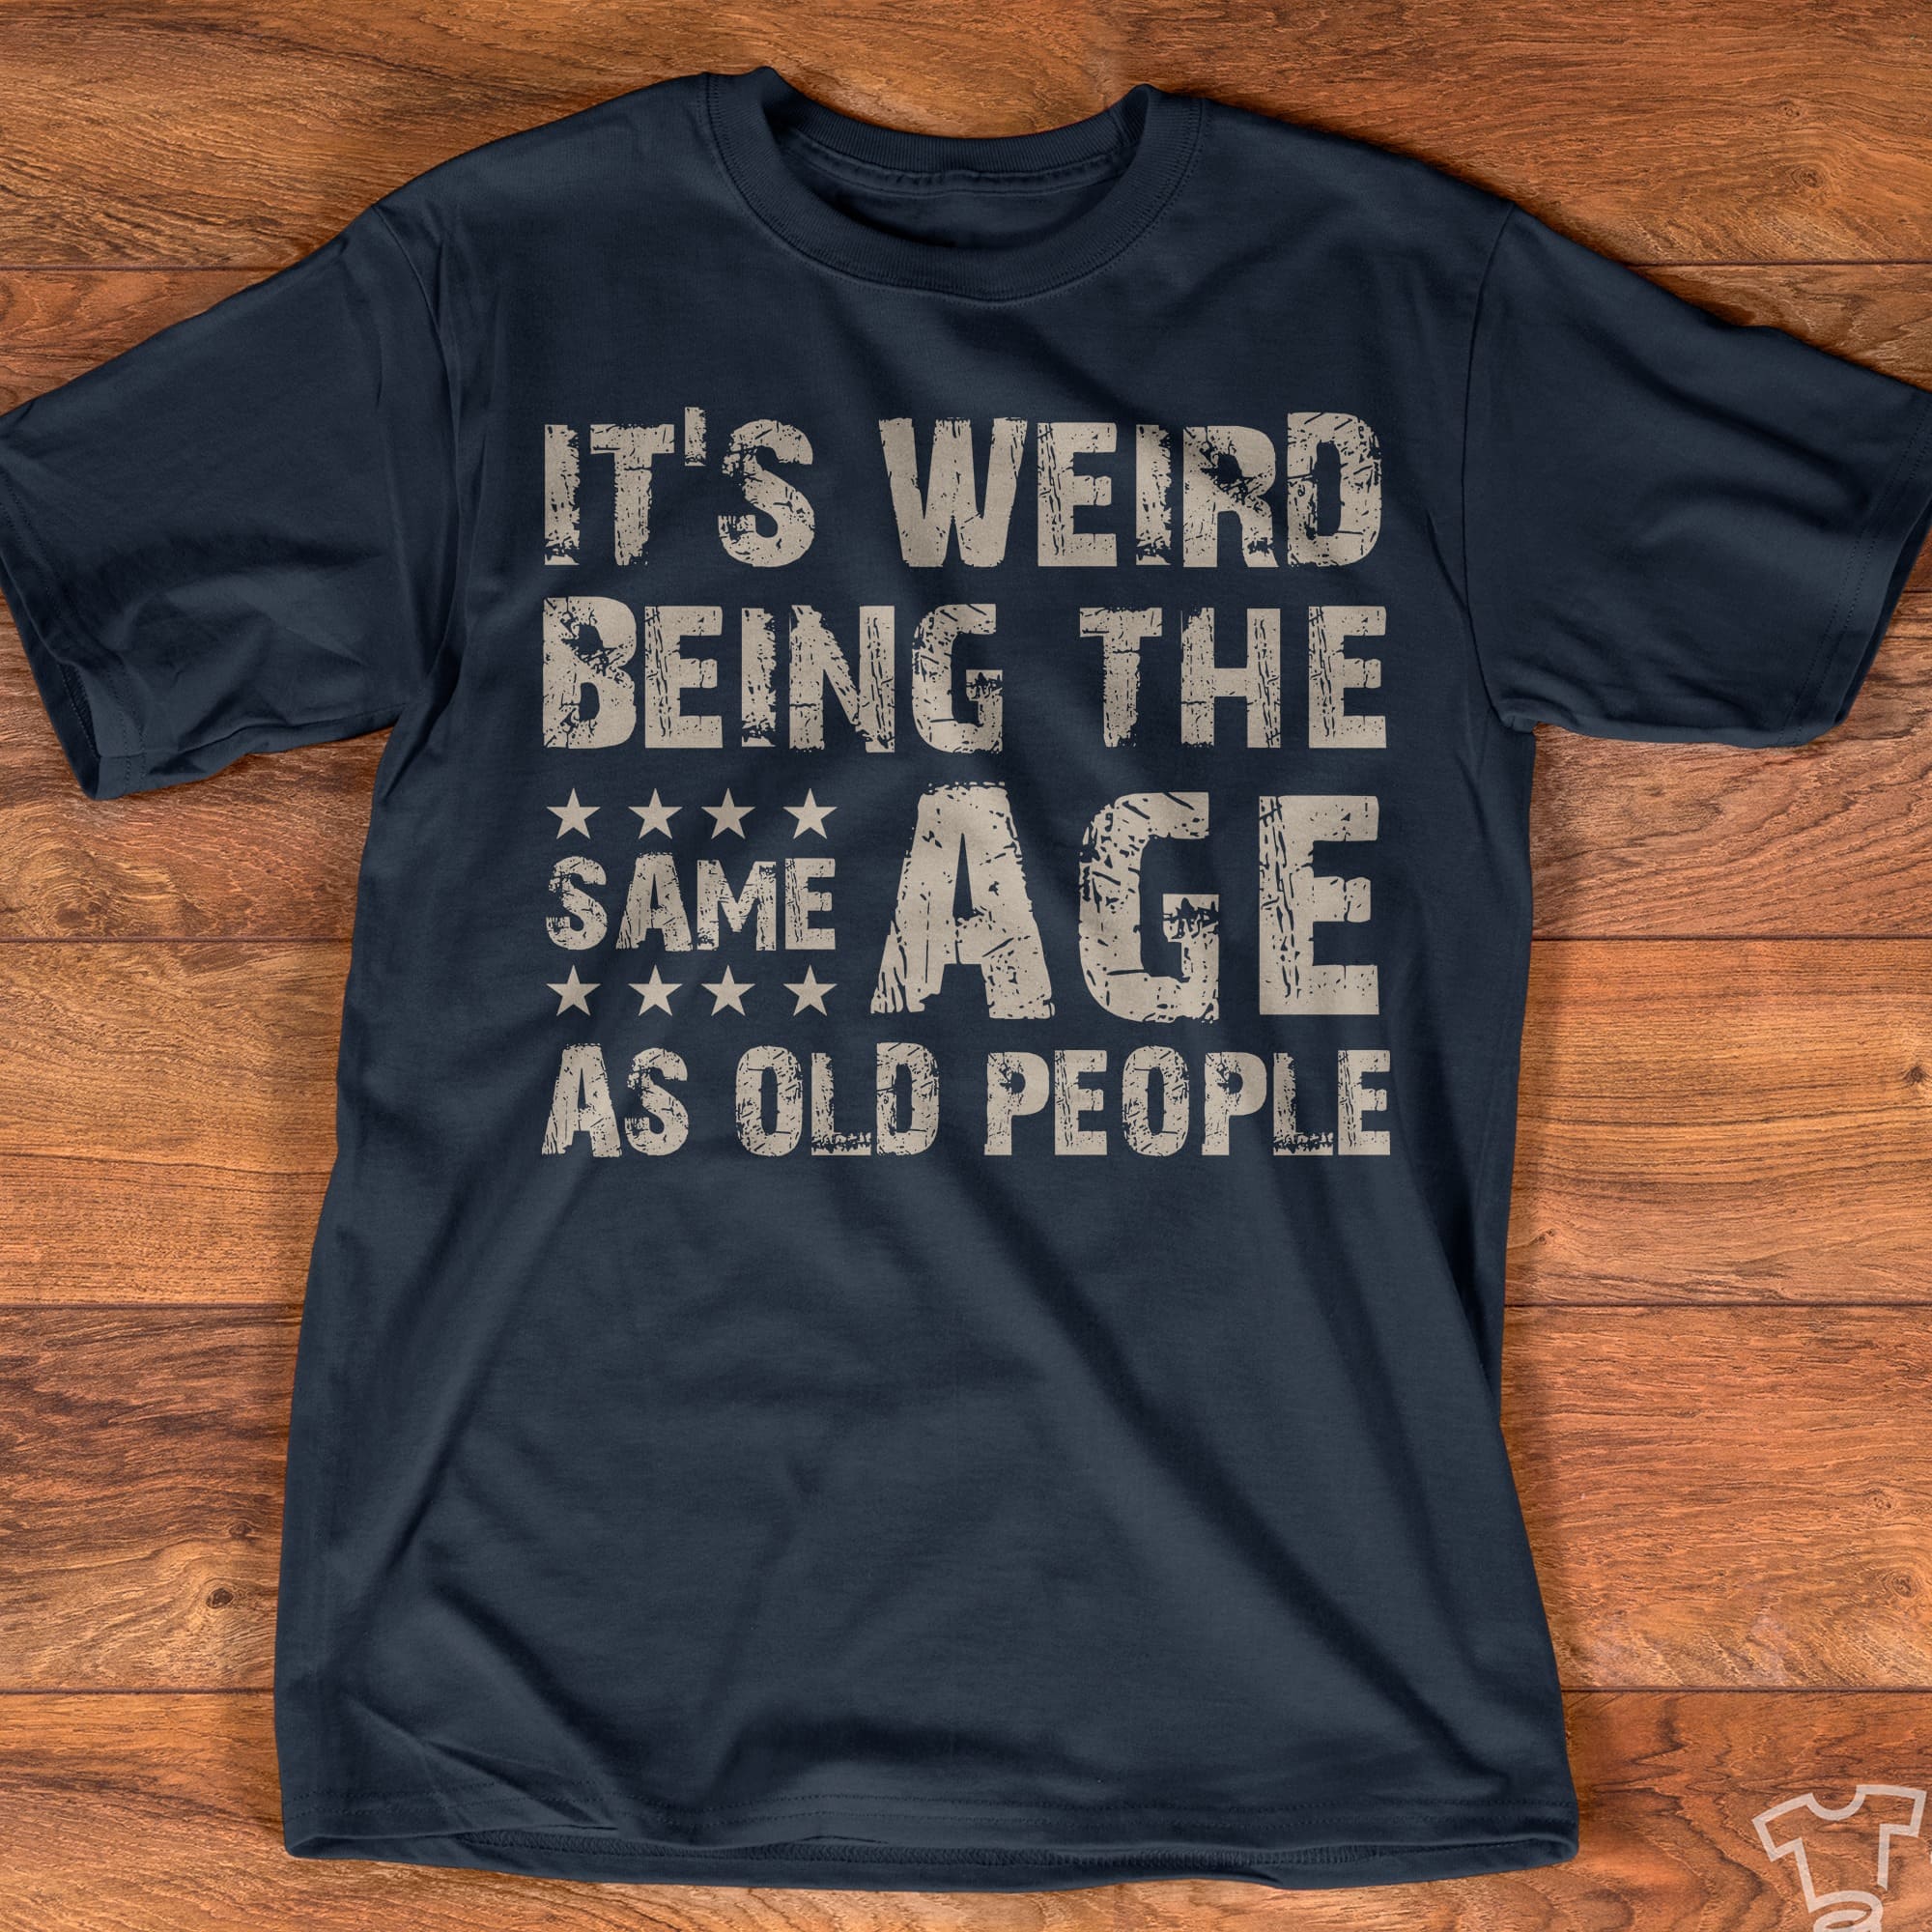 It's weir being the same age as old people - Gift for old people